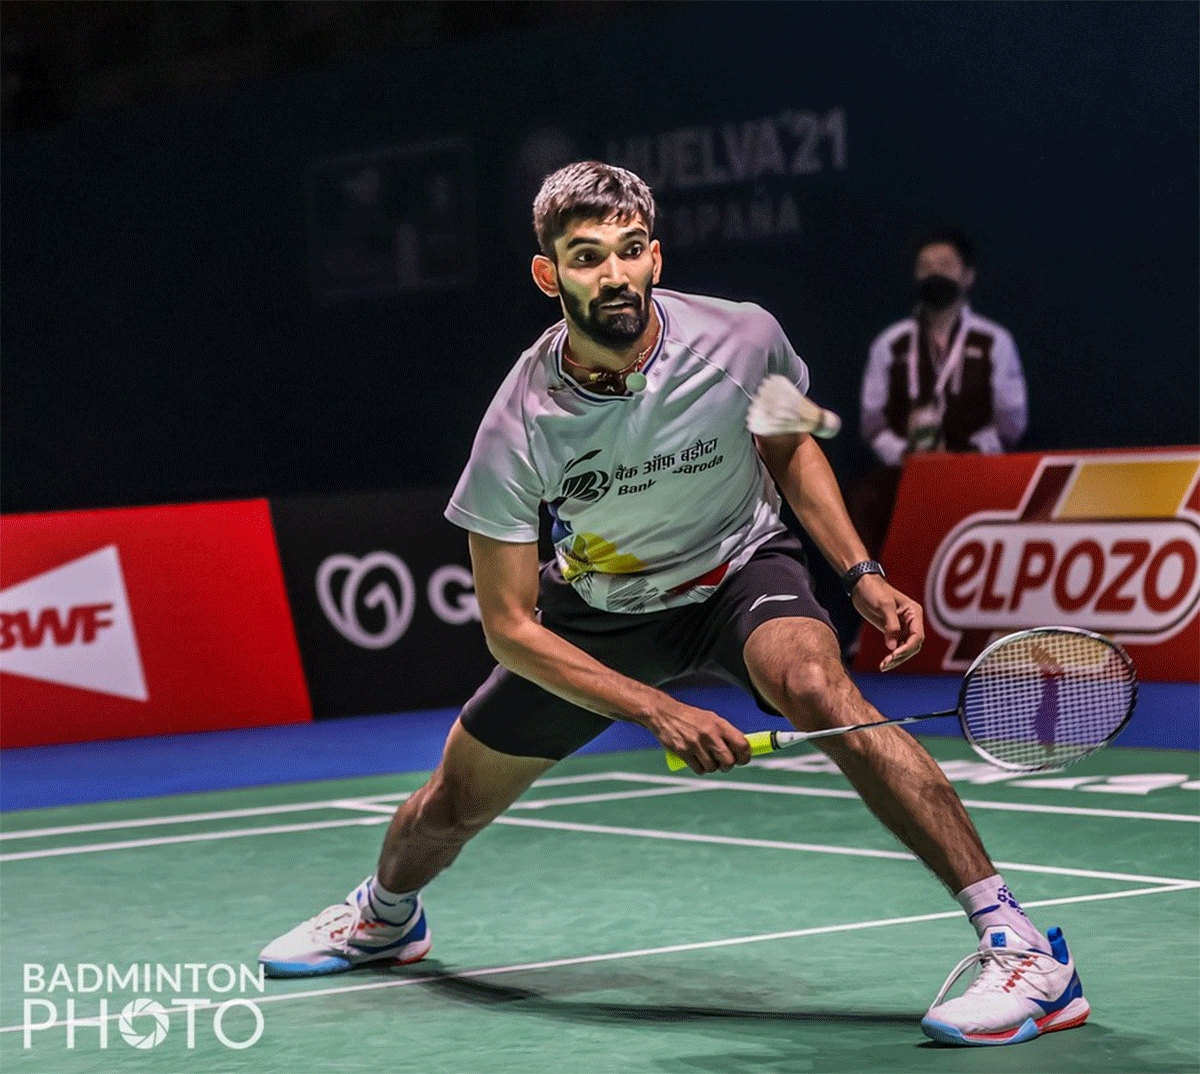 Kidambi Srikanth had a good run at the BWF World Championships but lost to Singapore's Loh Kean Yew in the final